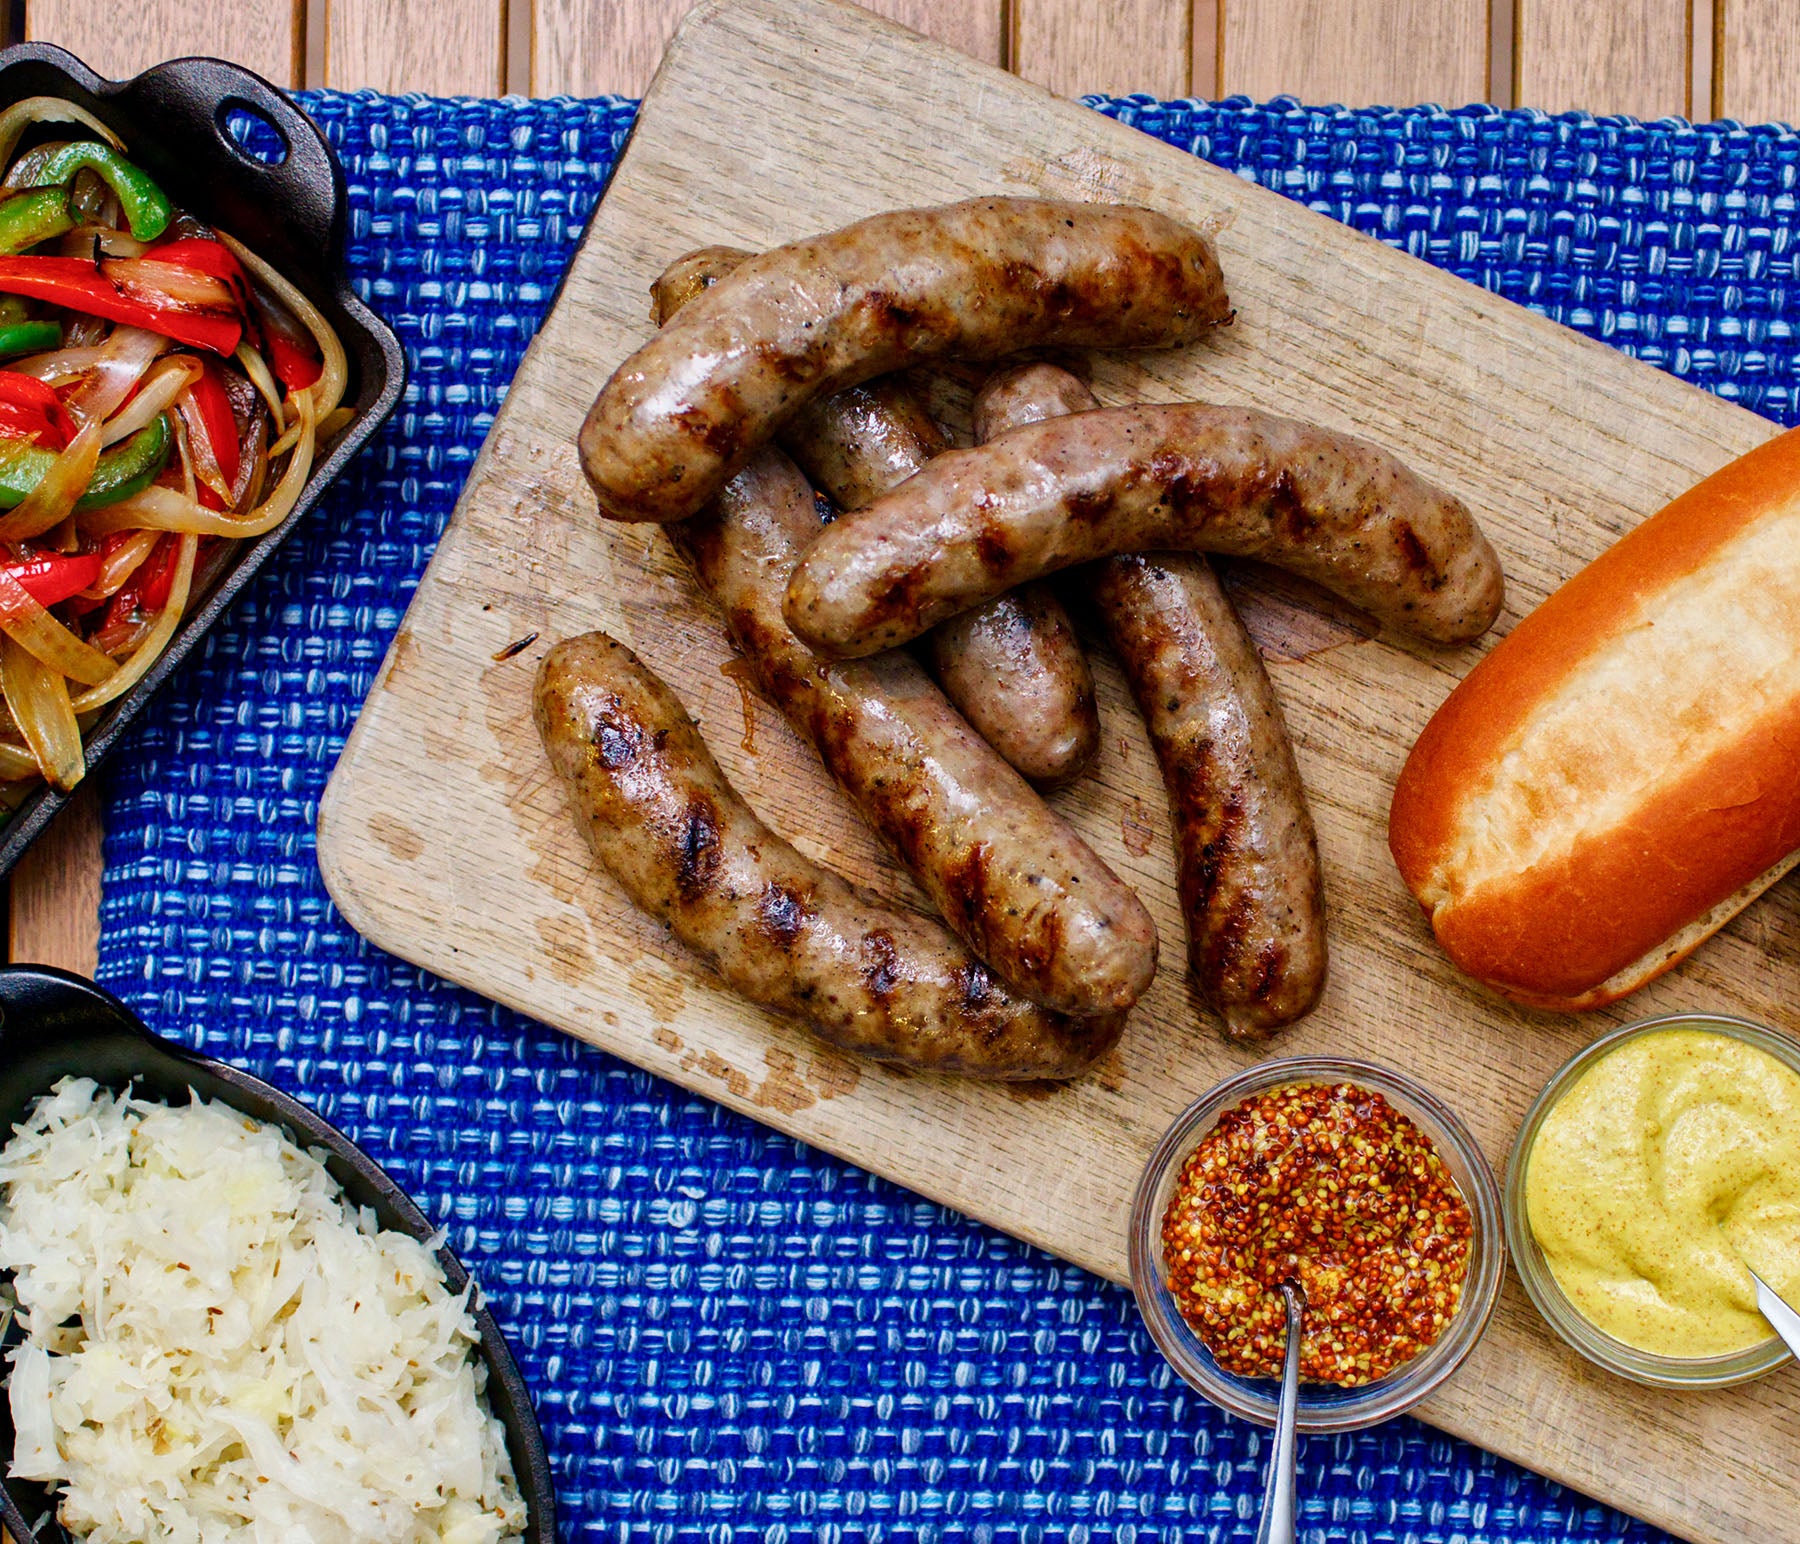 Pan-Fried Beer and Onion Bratwurst - Craving Tasty